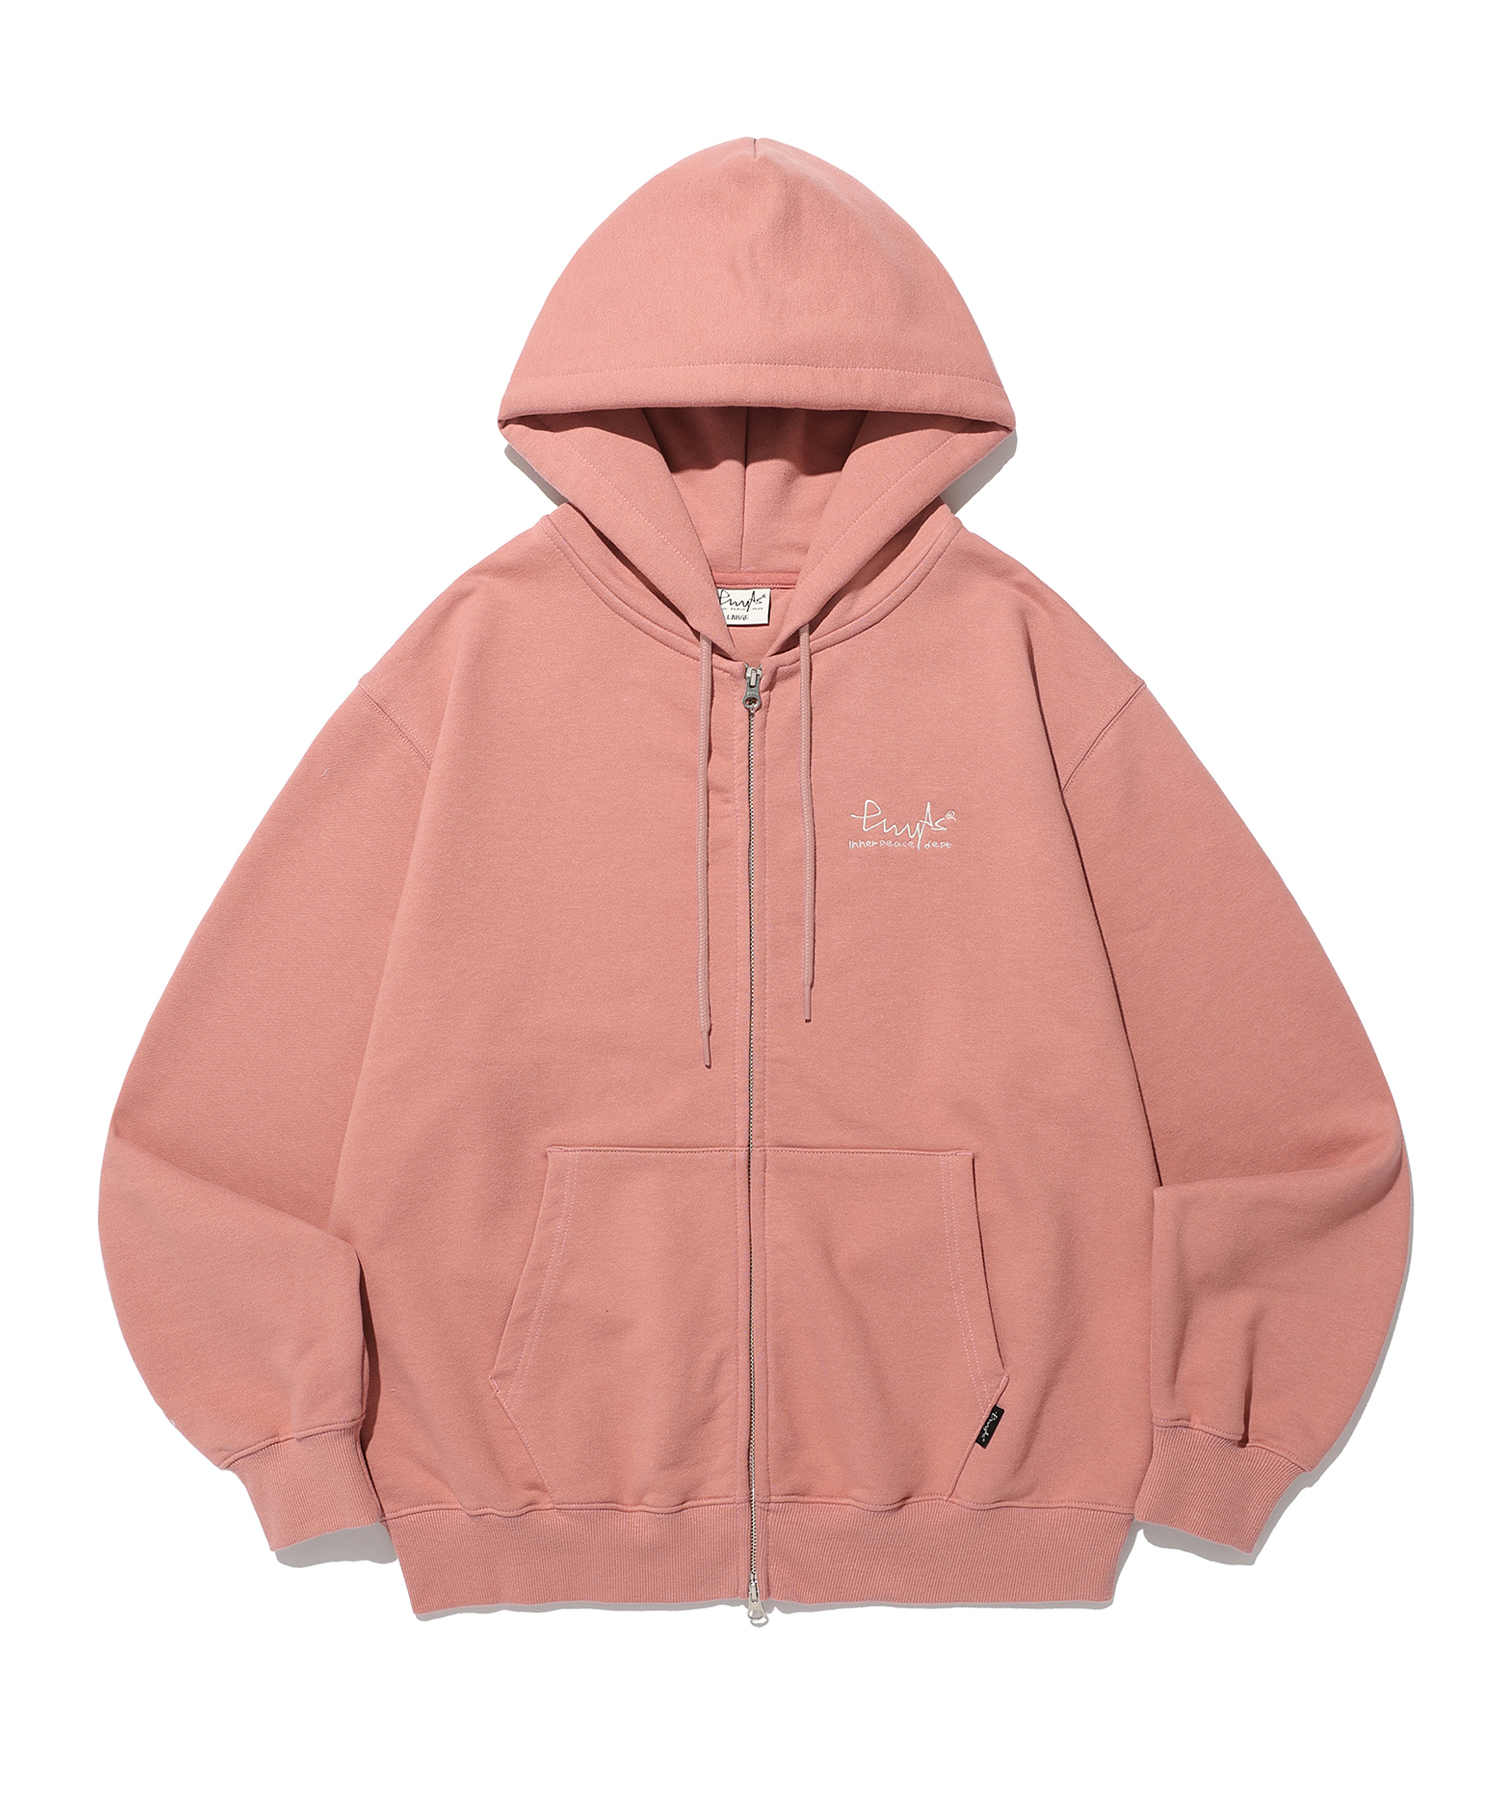 PHYPS® SMALL SIGN LOGO HOODIE ZIP UP DUSTY PINK